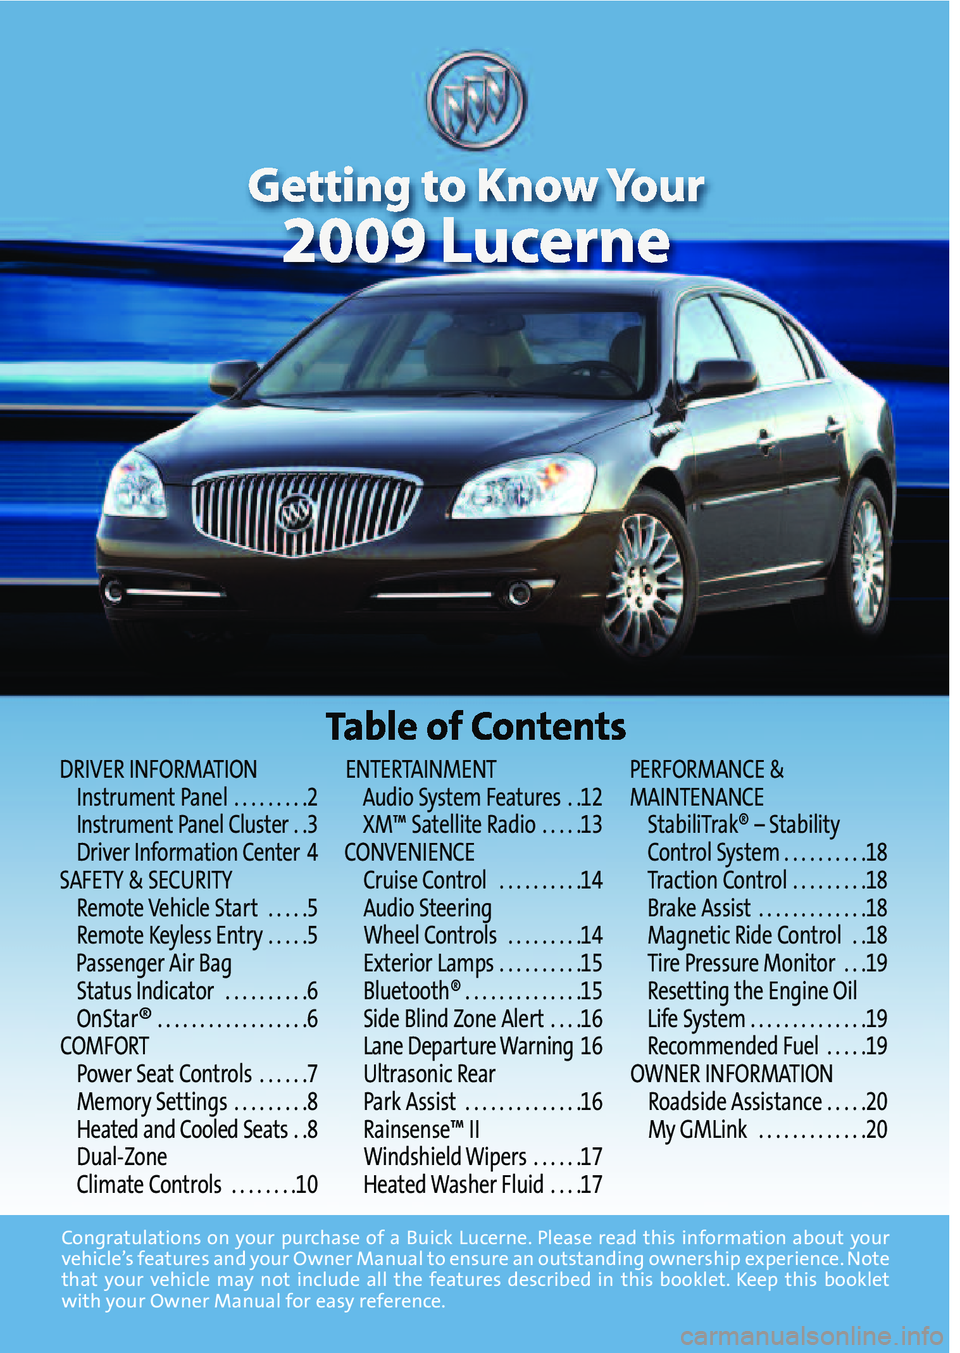 BUICK LUCERNE 2009  Get To Know Guide 